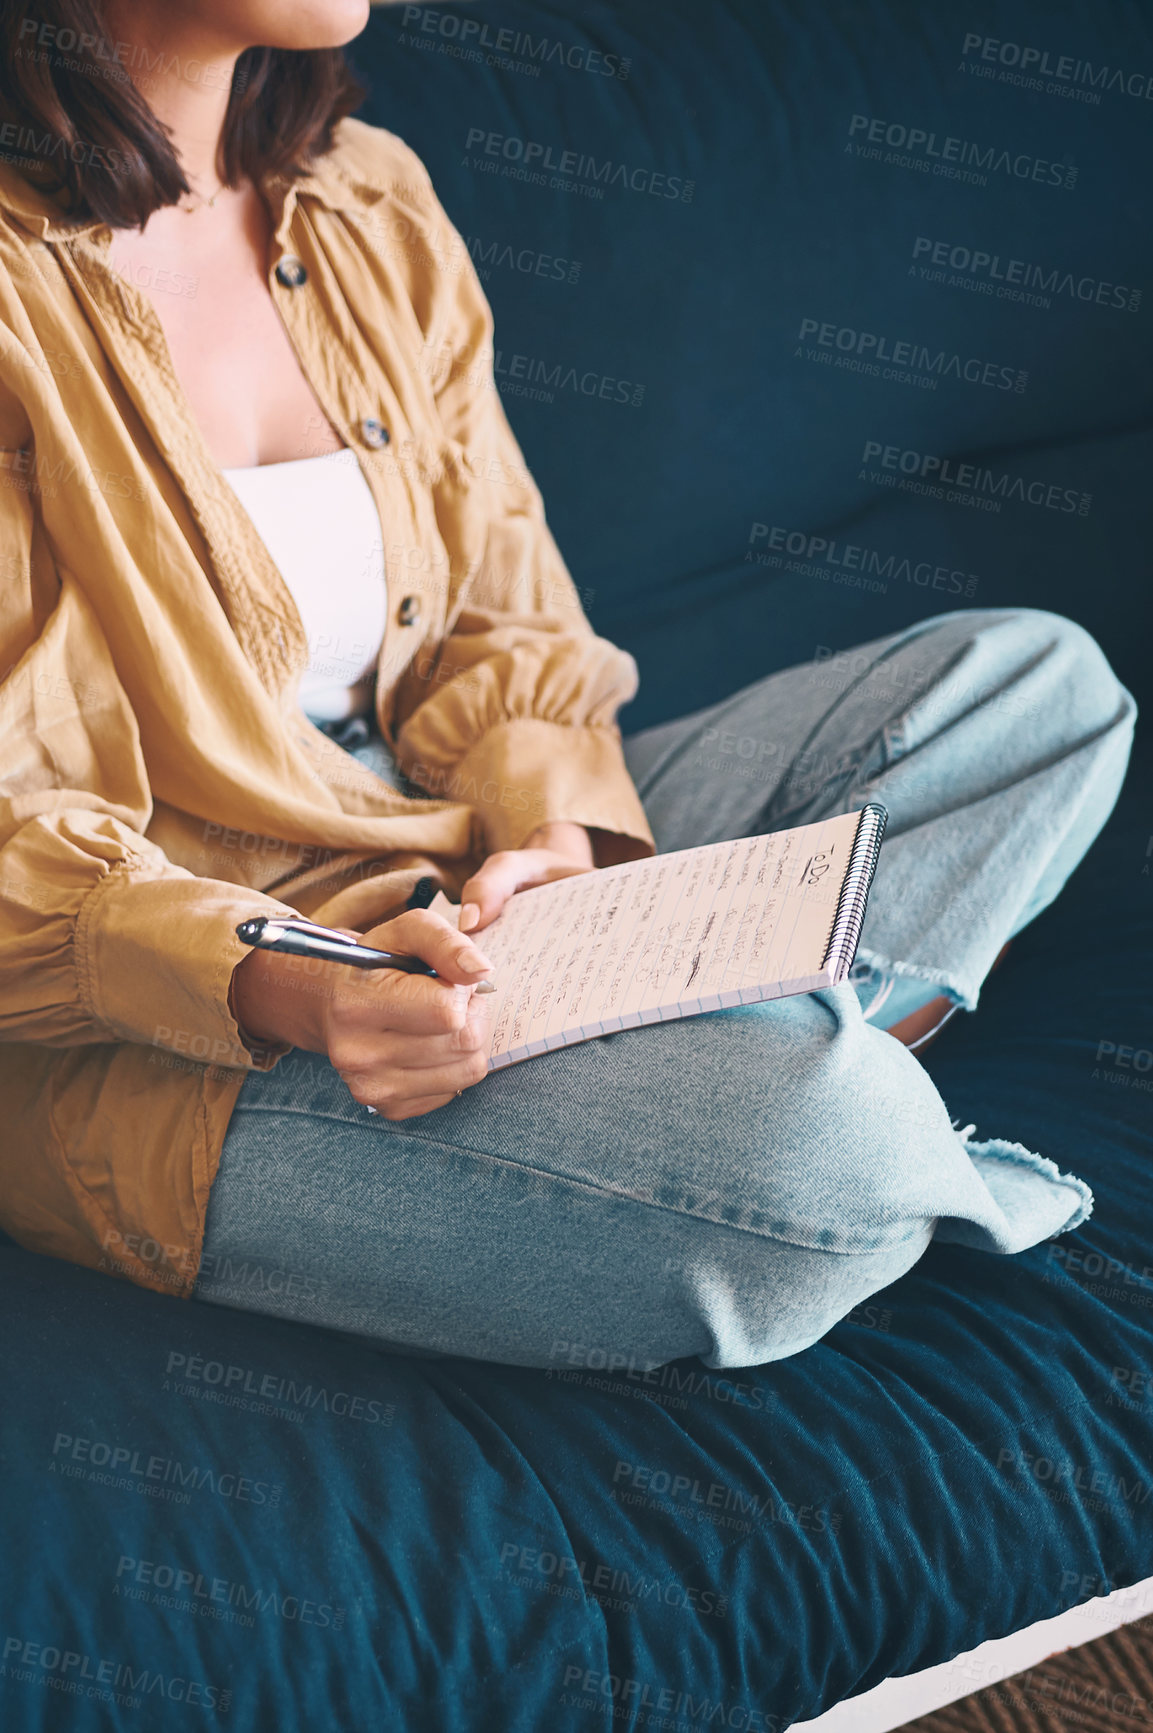 Buy stock photo Shot of an unrecognisable woman making notes while relaxing on the sofa at home